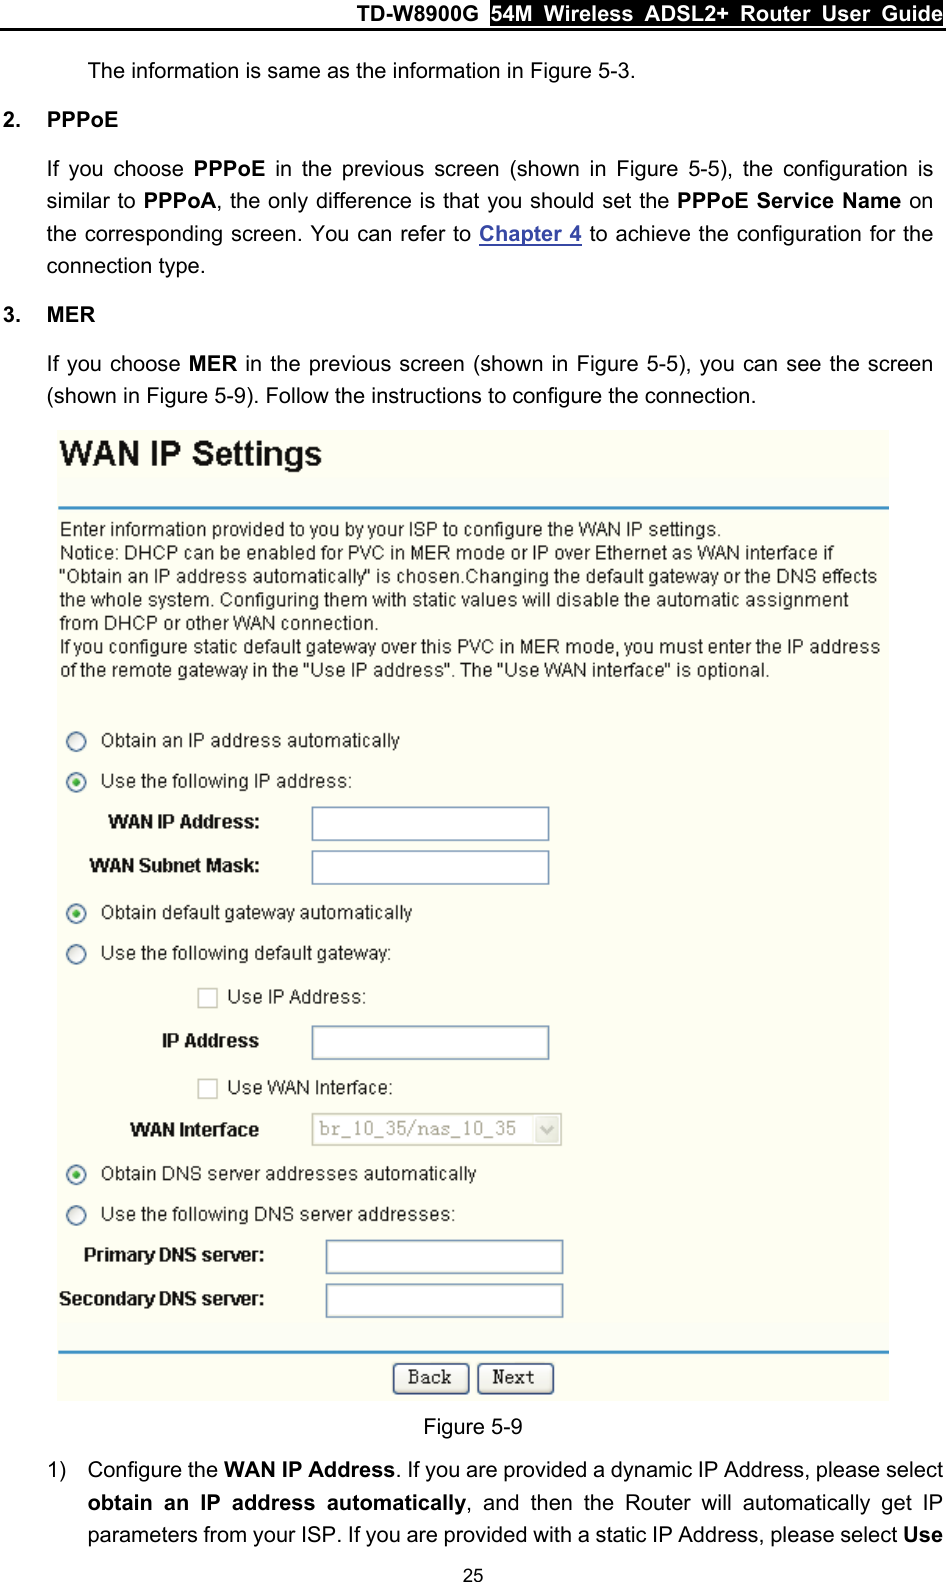 TD-W8900G  54M Wireless ADSL2+ Router User Guide 25 The information is same as the information in Figure 5-3. 2. PPPoE If you choose PPPoE in the previous screen (shown in Figure 5-5), the configuration is similar to PPPoA, the only difference is that you should set the PPPoE Service Name on the corresponding screen. You can refer to Chapter 4 to achieve the configuration for the connection type. 3. MER If you choose MER in the previous screen (shown in Figure 5-5), you can see the screen (shown in Figure 5-9). Follow the instructions to configure the connection.  Figure 5-9 1) Configure the WAN IP Address. If you are provided a dynamic IP Address, please select obtain an IP address automatically, and then the Router will automatically get IP parameters from your ISP. If you are provided with a static IP Address, please select Use 